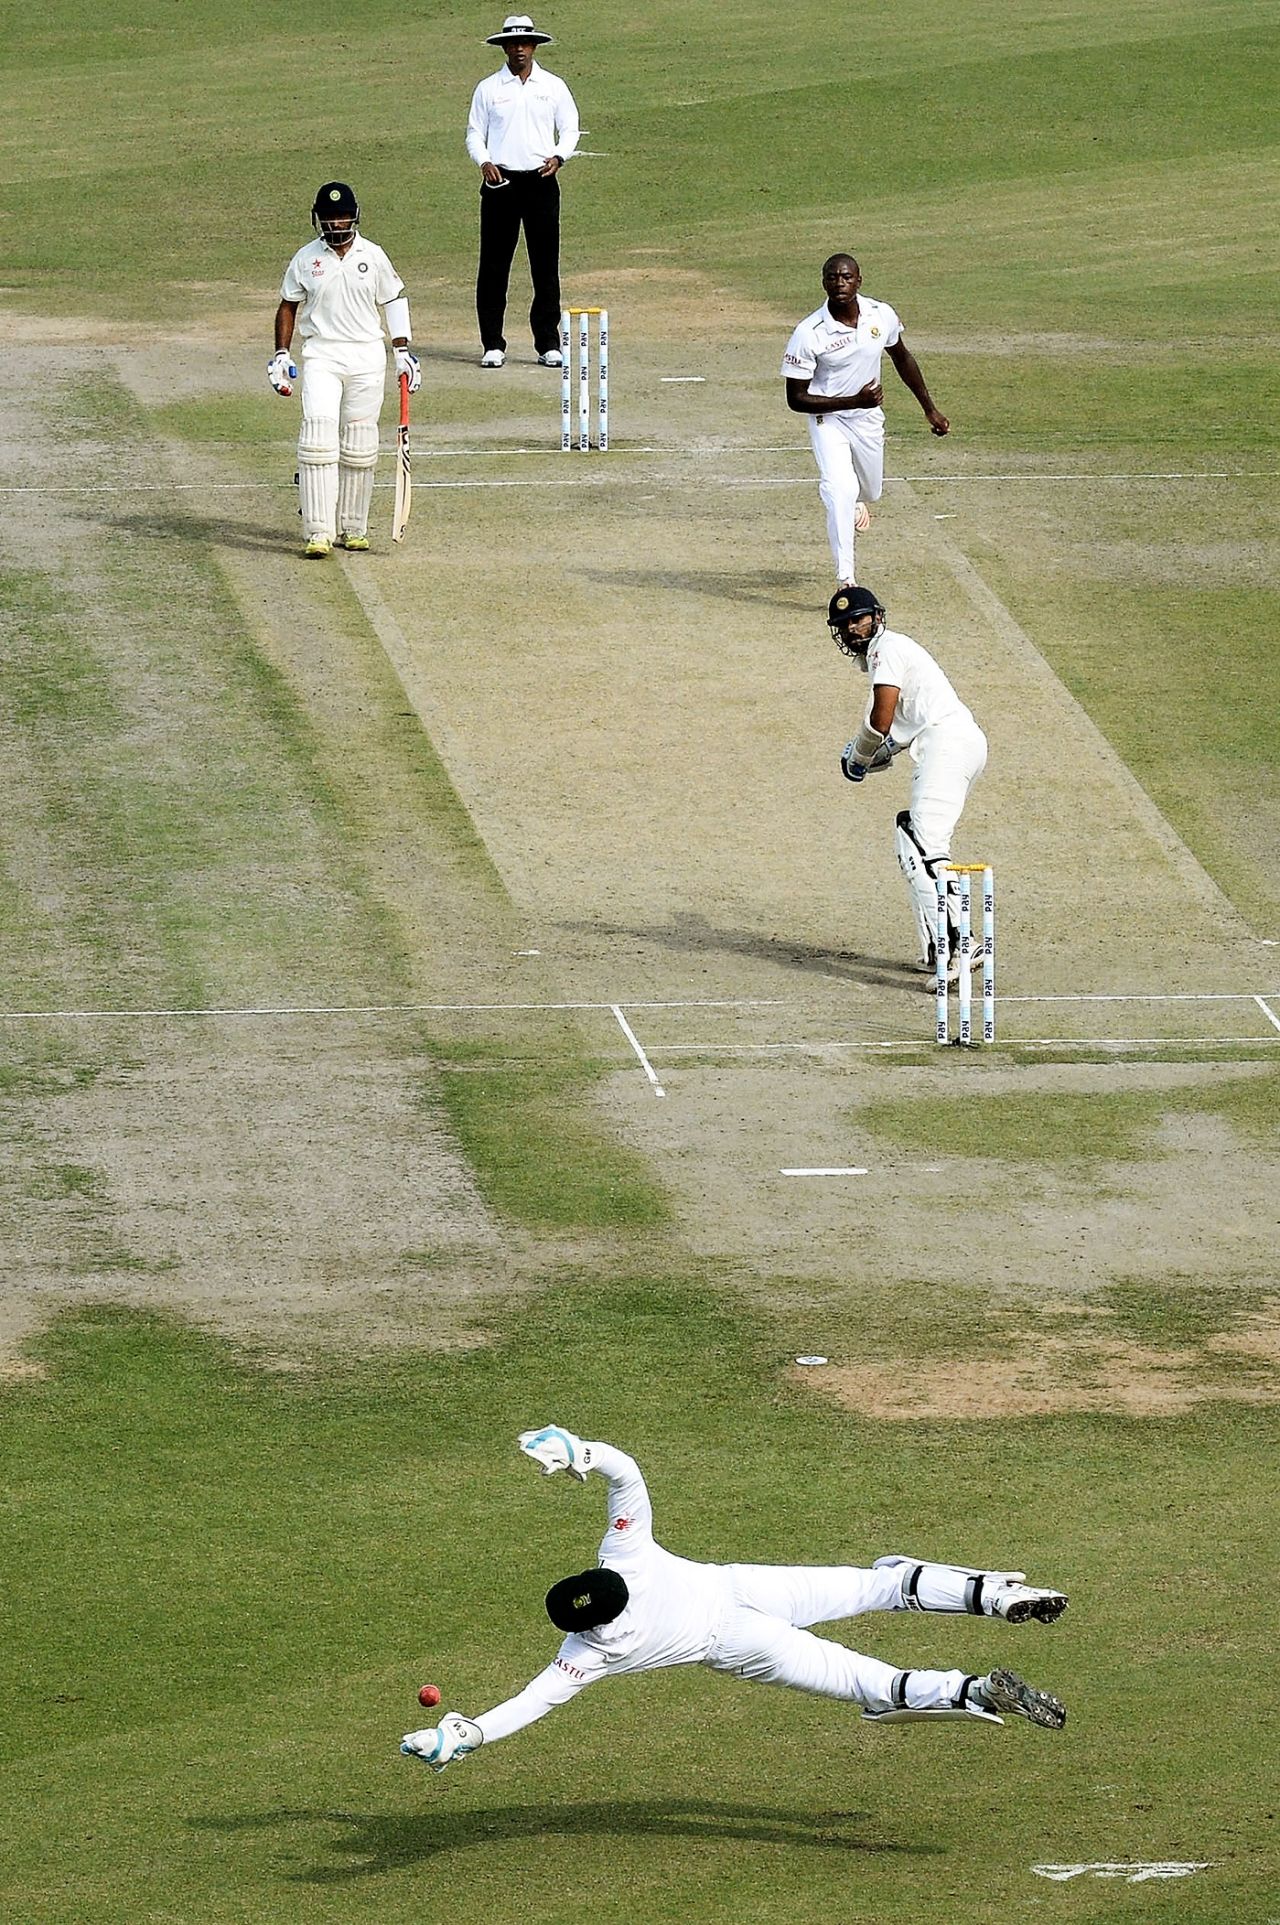 Kagiso Rabada looks on as Dane Vilas tries to stop a shot from M Vijay, India v South Africa, 1st Test, Mohali, 1st day, November 5, 2015